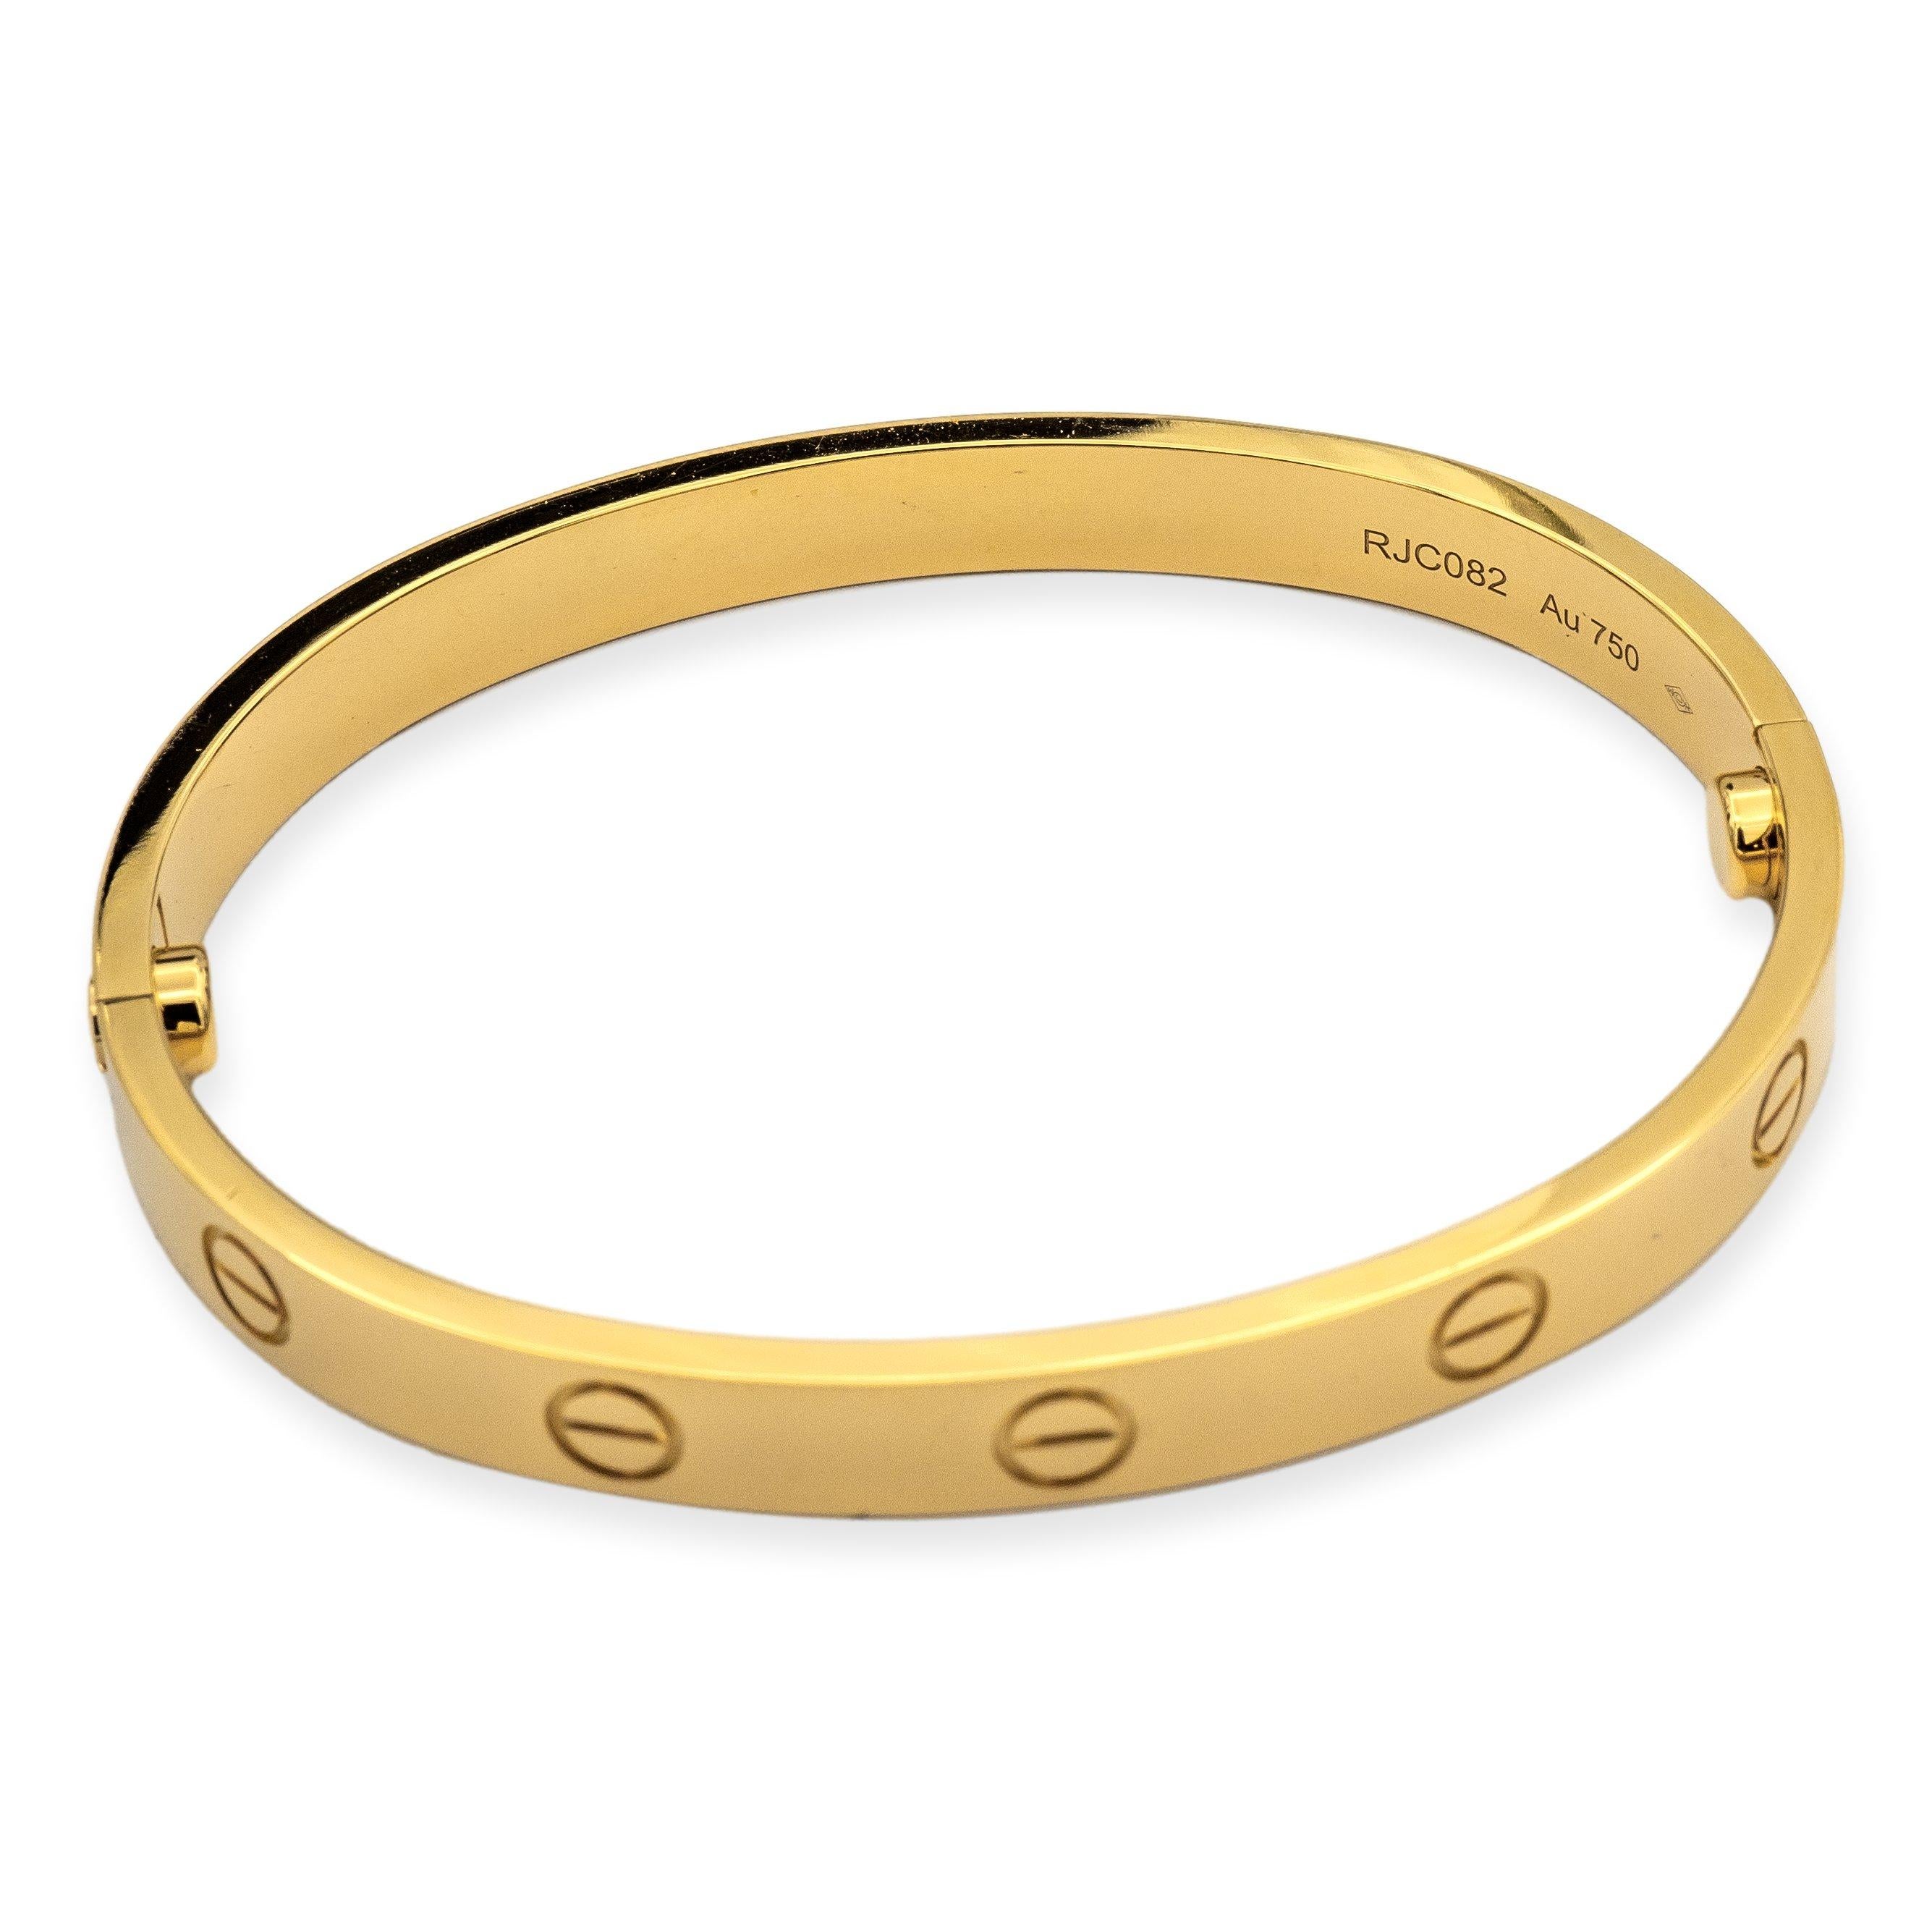 Cartier Love 18K Yellow Gold Bangle Bracelet Size 16 with Certificate ...